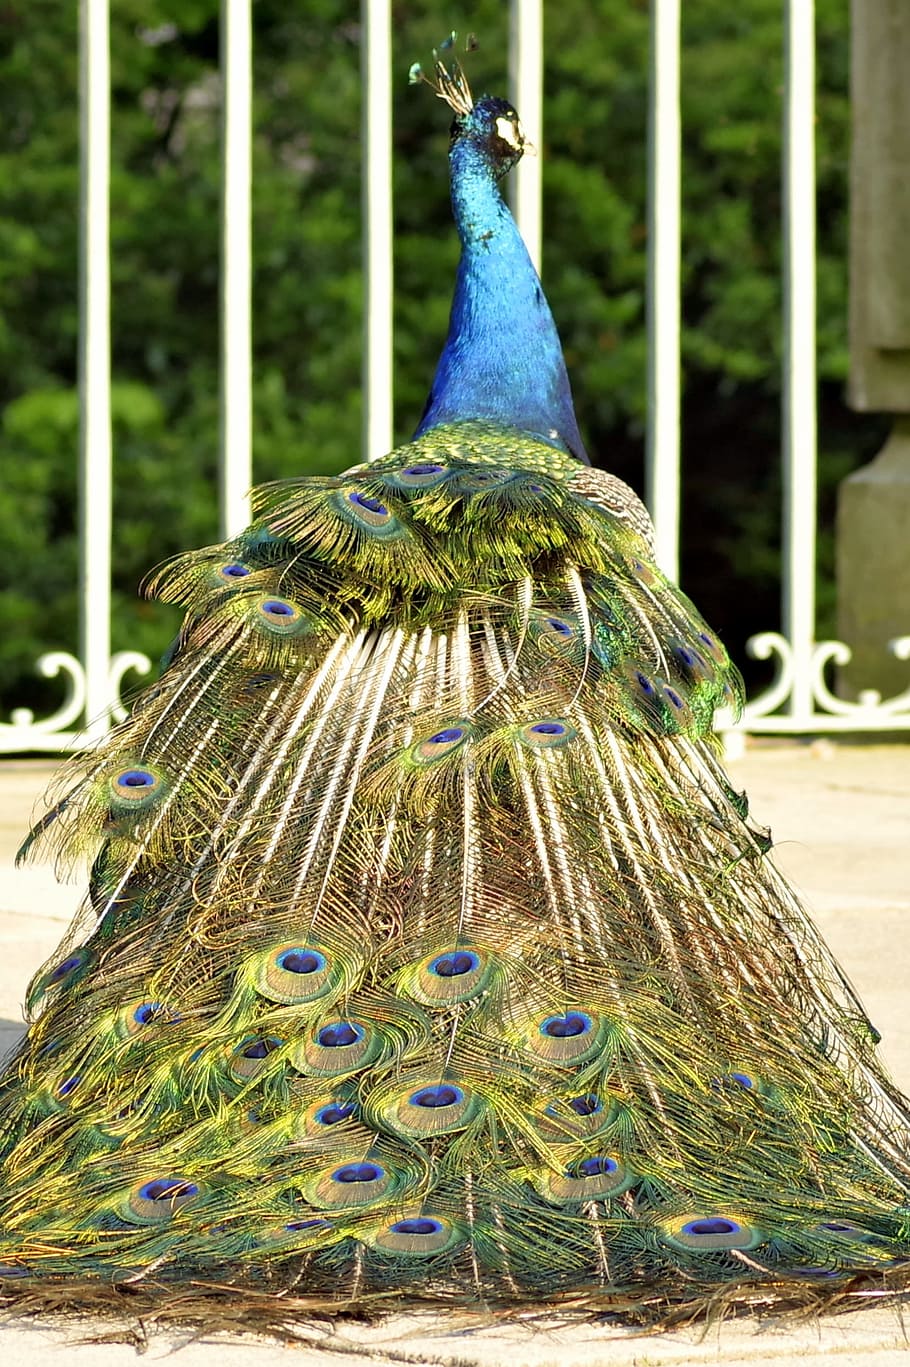 Peacock, Tail, Eye, Pen, Color, peacock, tail, park, dashing, gorgeous, complex